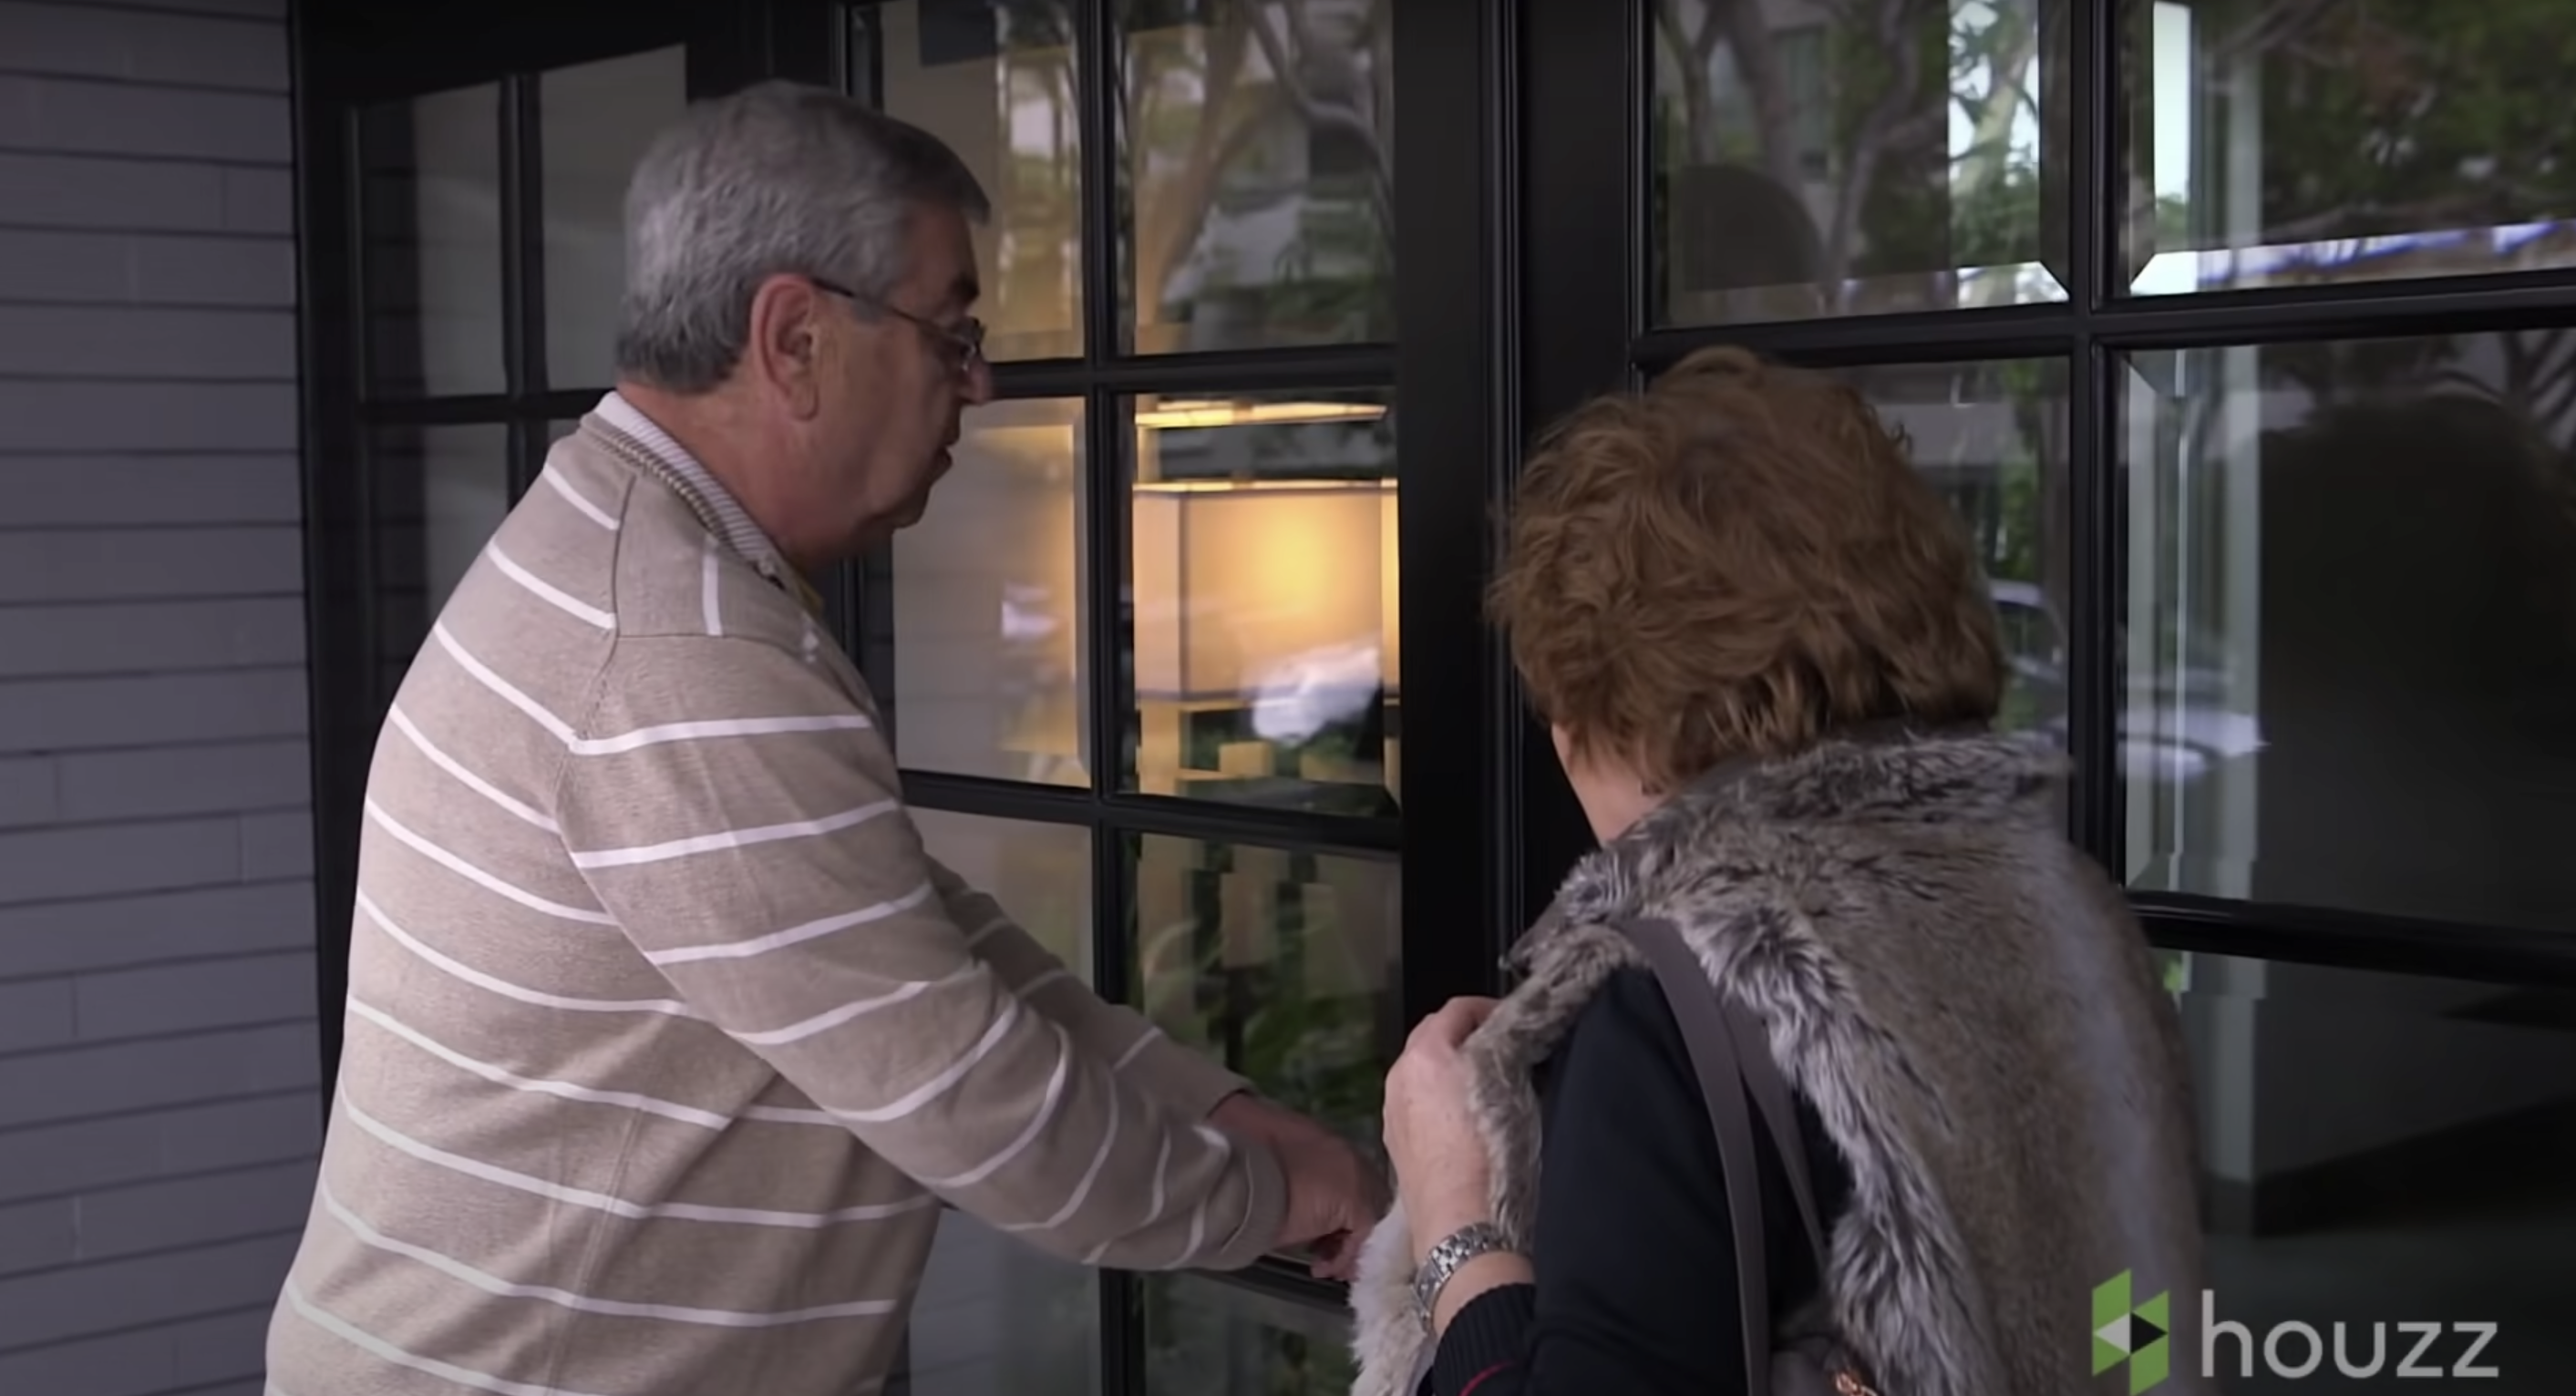 Mila Kunis' parents, Mark and Elvira Kunis, are pictured outside the condo | Source: Youtube.com/HouzzTV